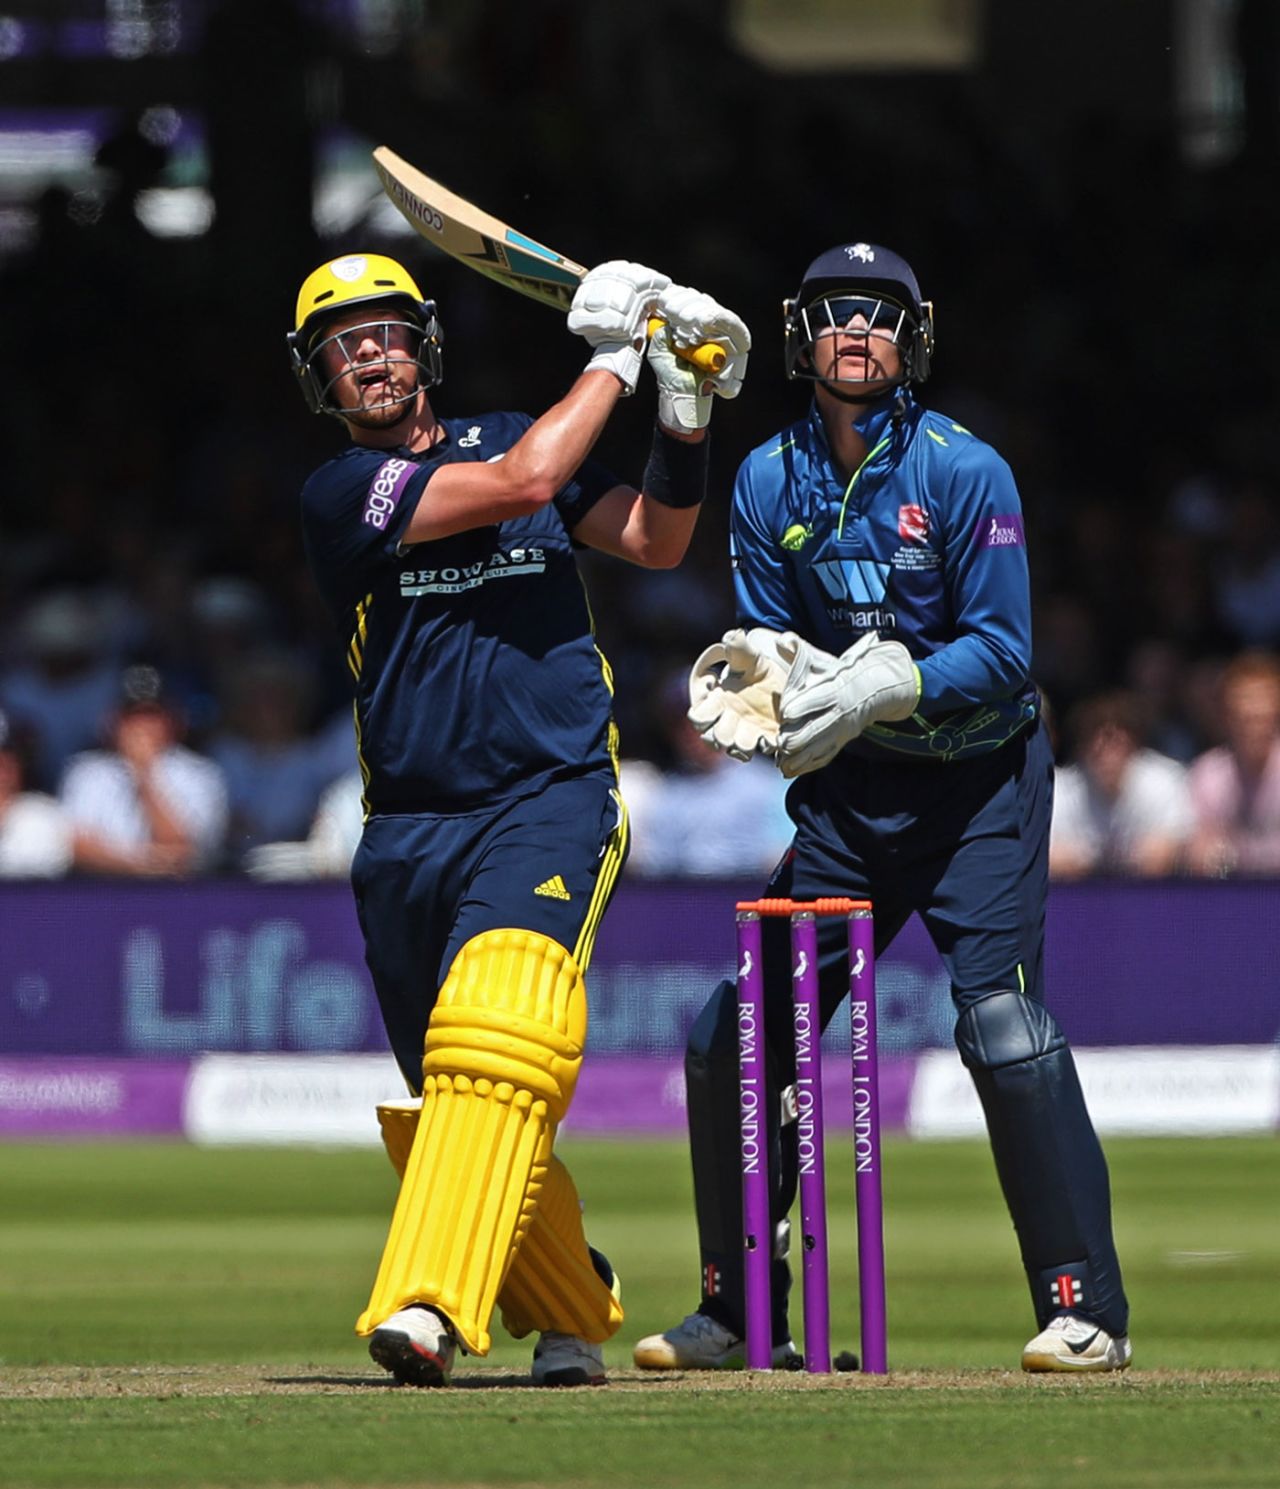 Sam Northeast finished unbeaten on 75, Hampshire v Kent, Royal London Cup, Final, Lord's, June 30, 2018